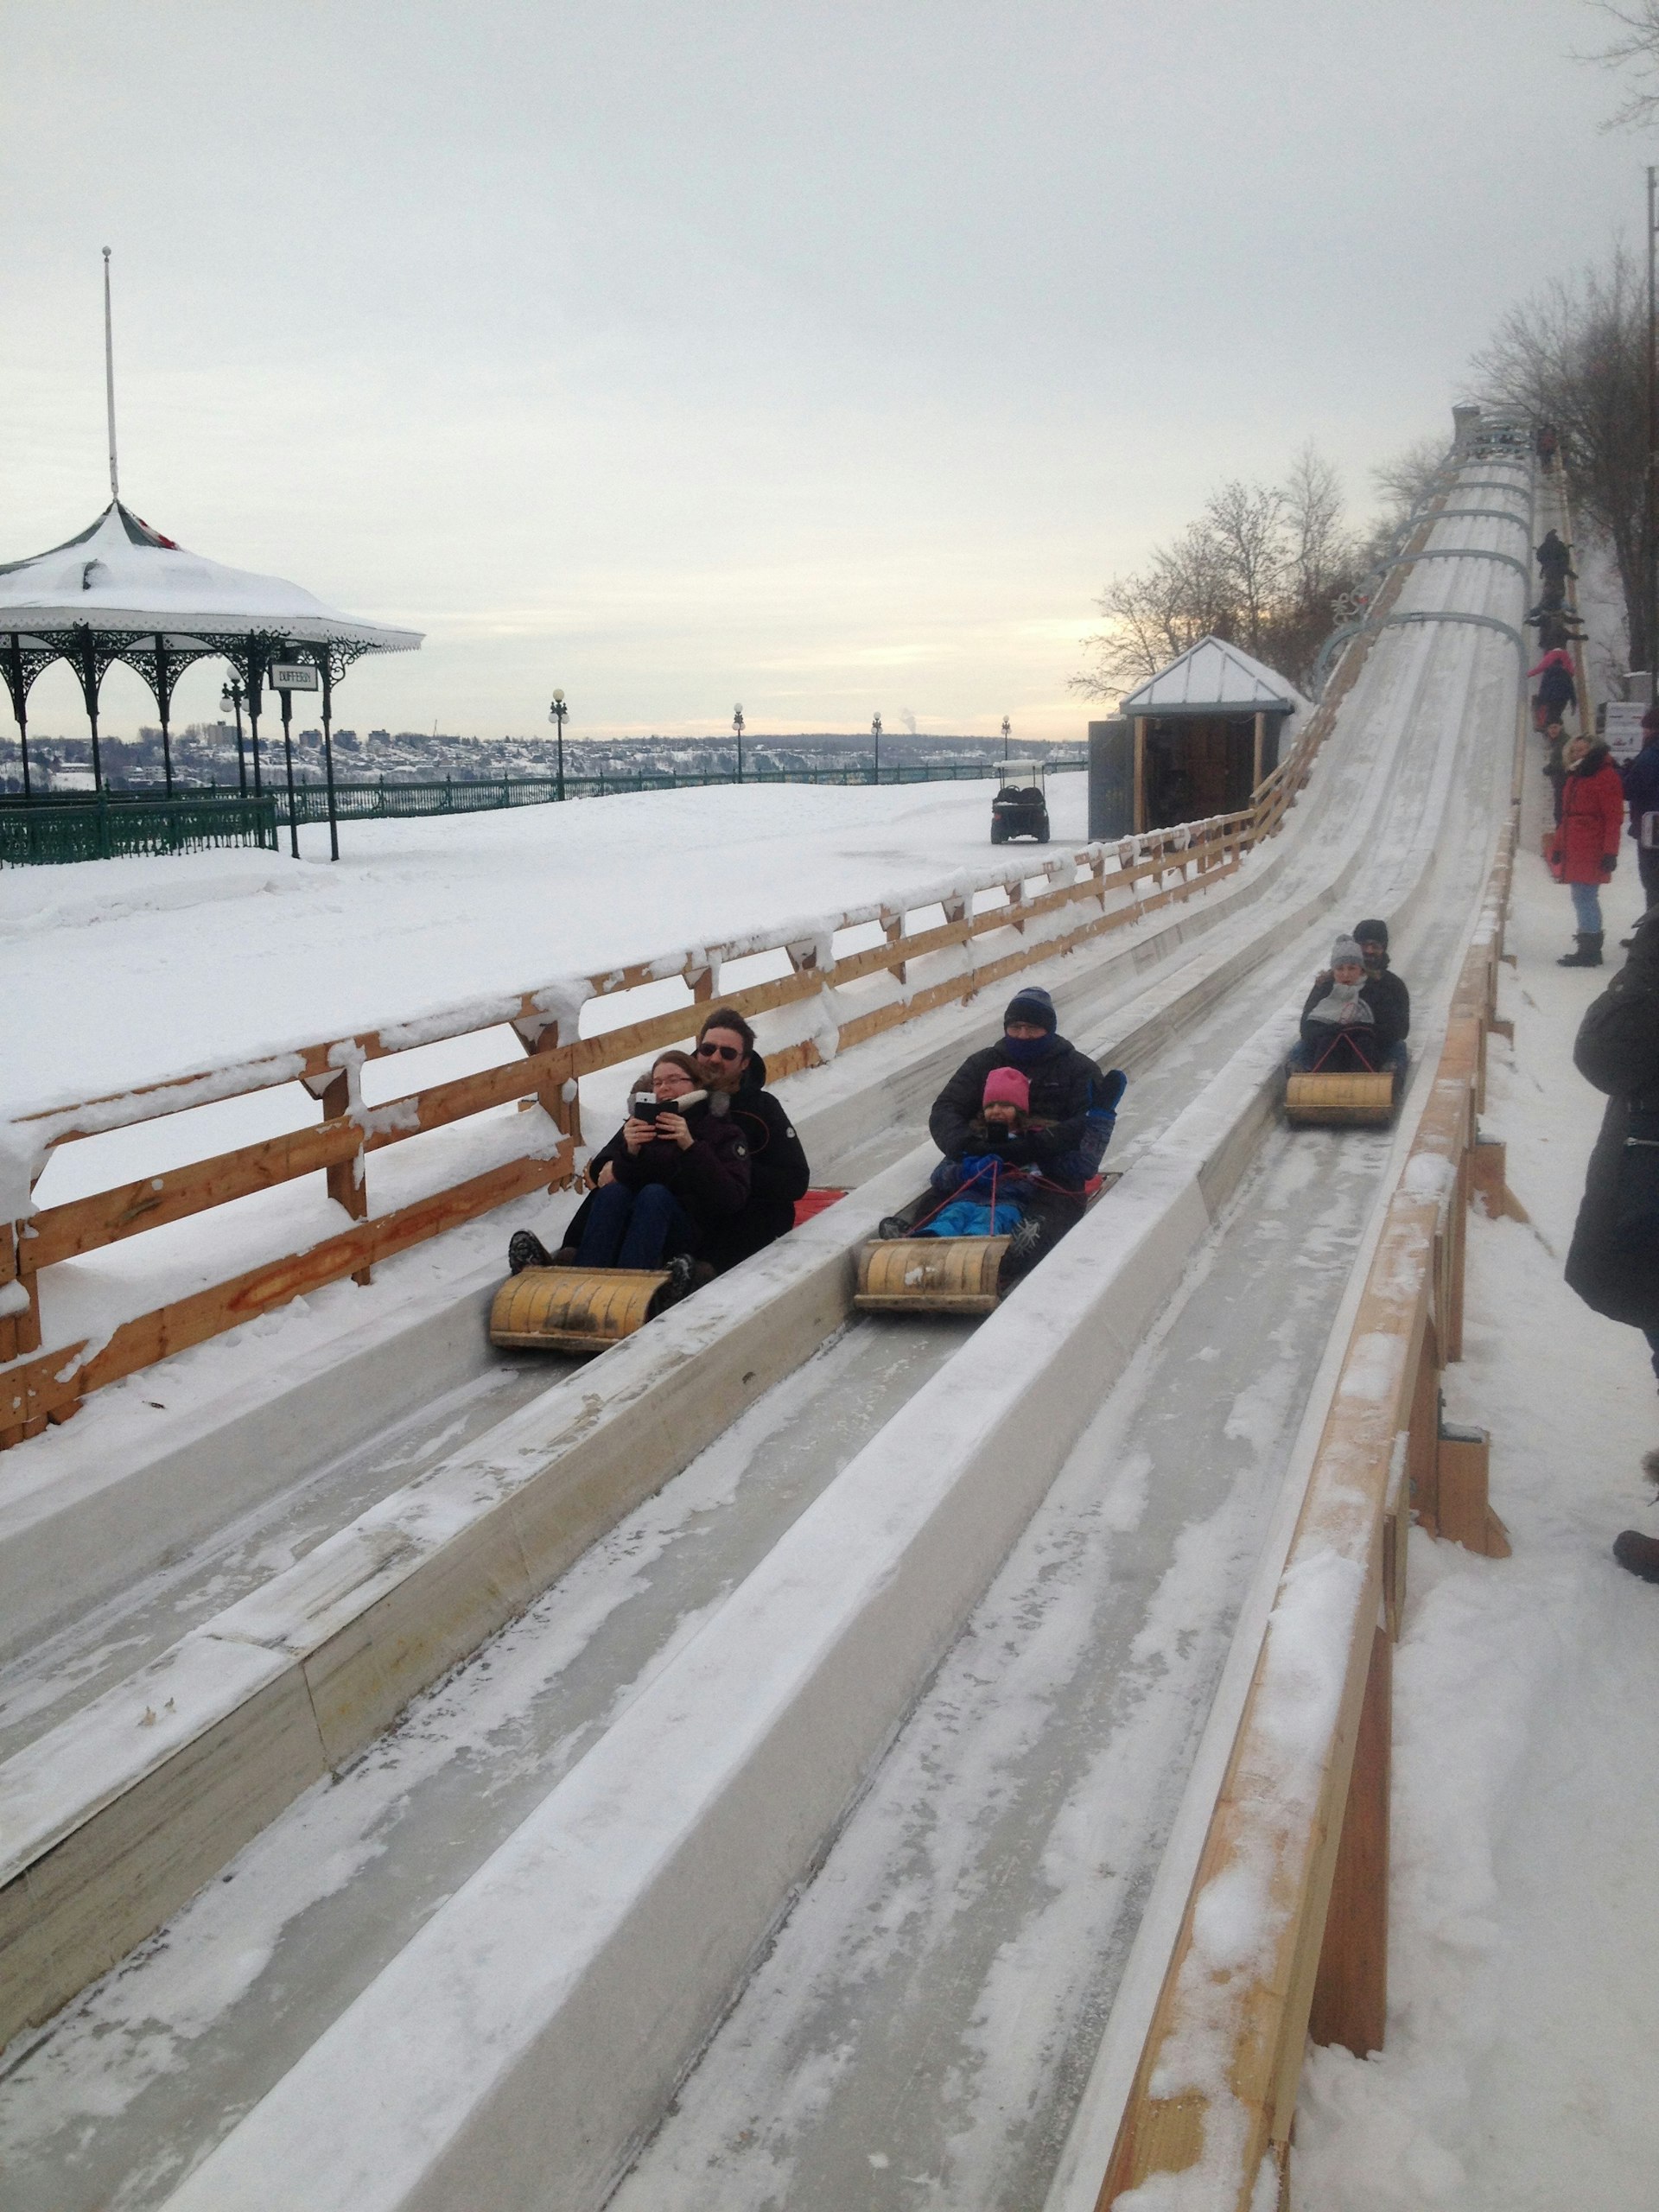 Three people sled down a large wooden slide toward the camera with the banks of a river to the left in Québec City.